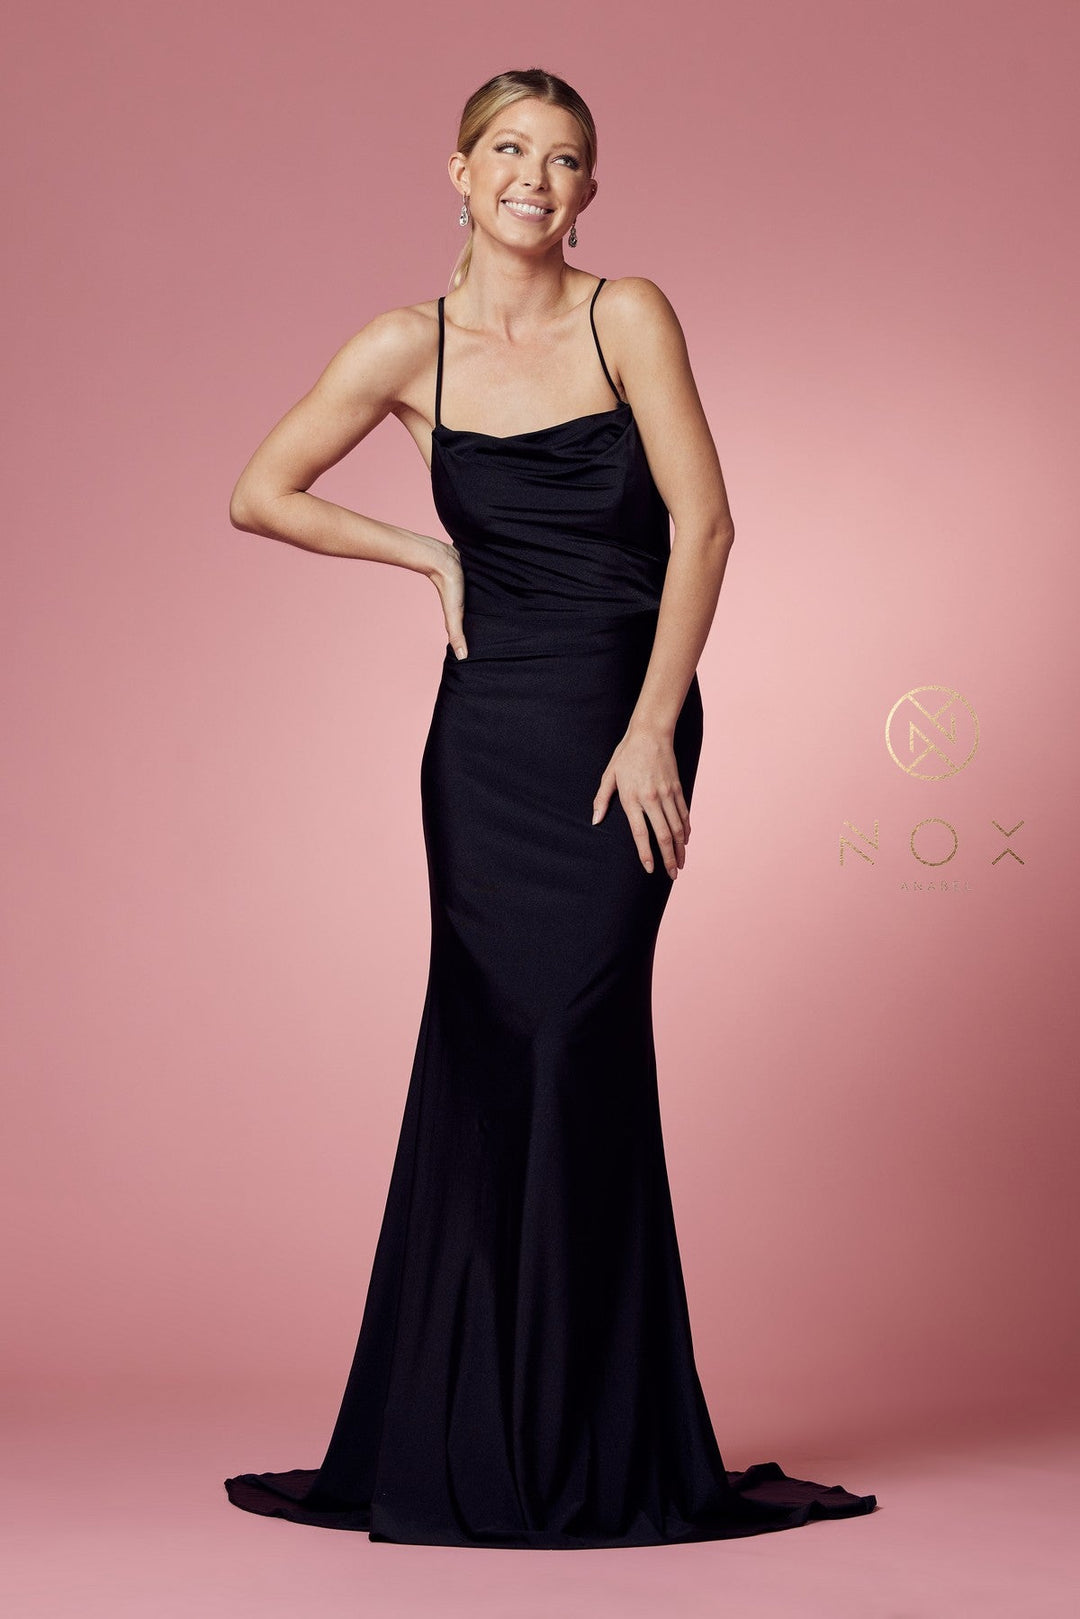 Fitted Cowl Neck Lace-Up Back Gown by Nox Anabel E1007